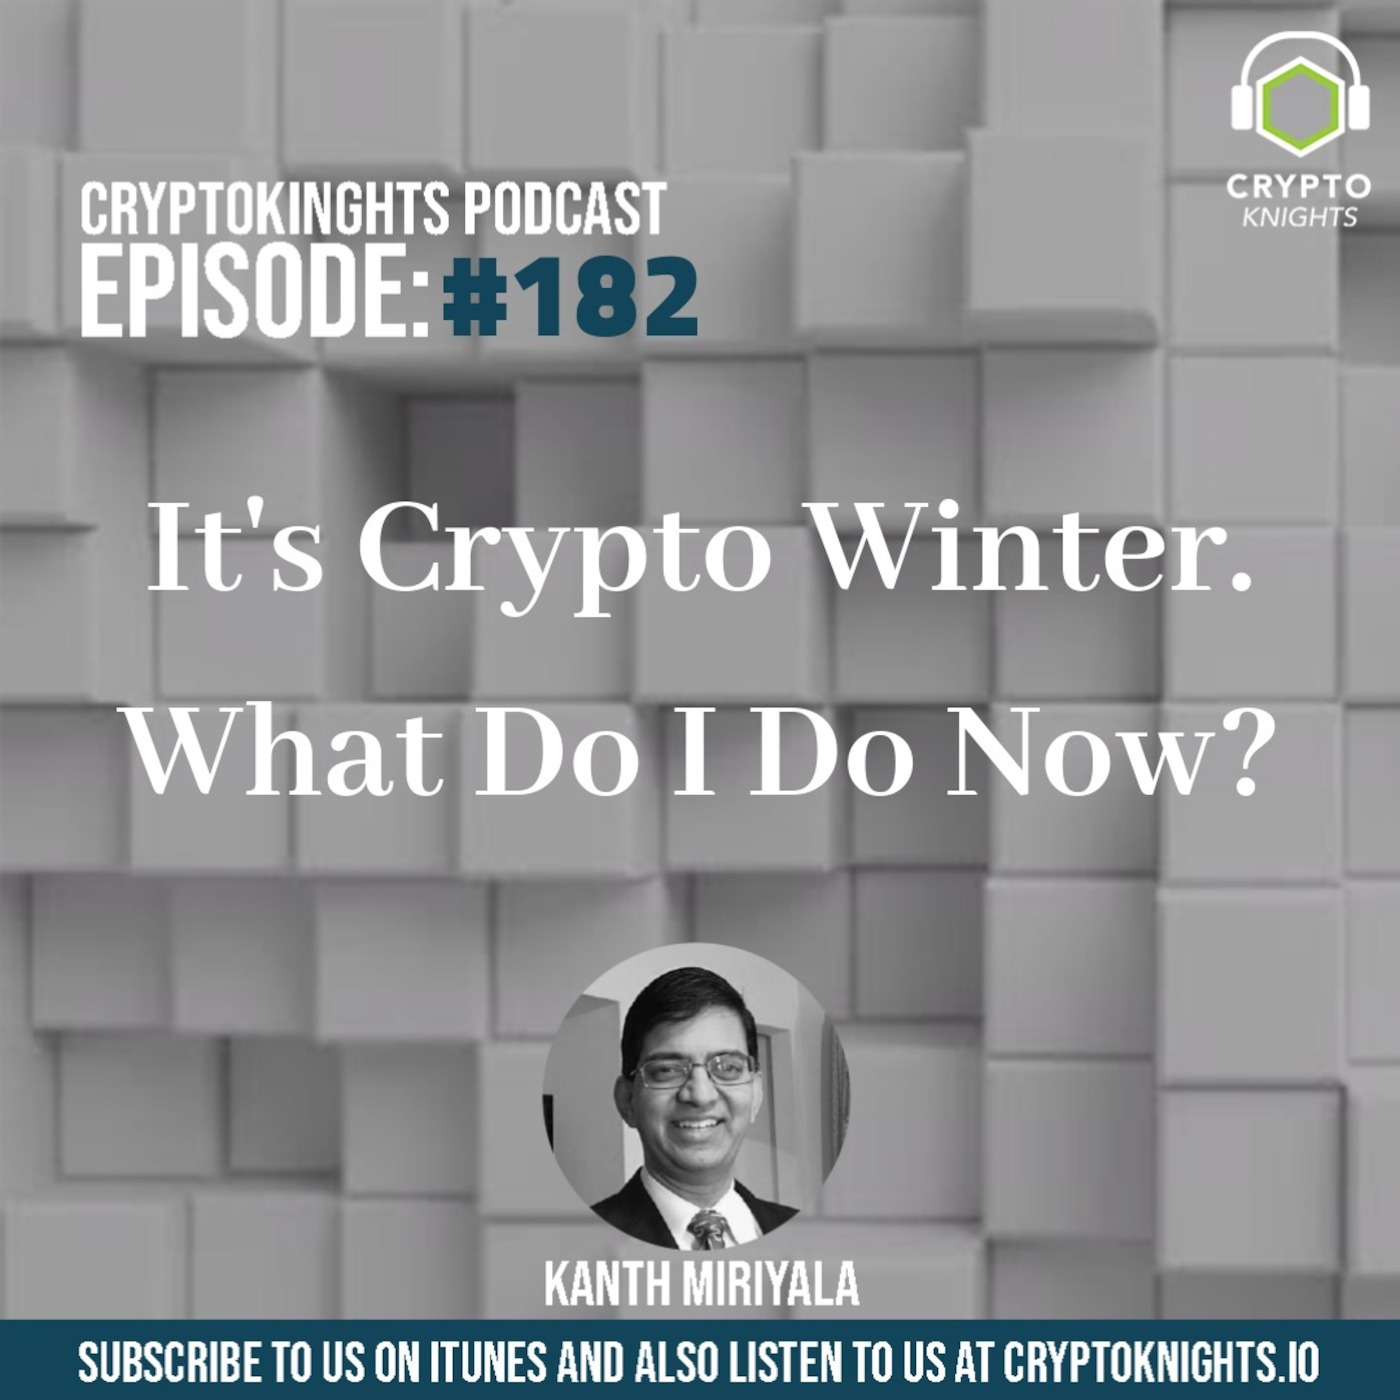 Episode 182 - It’s Crypto Winter. What Do I Do Now?